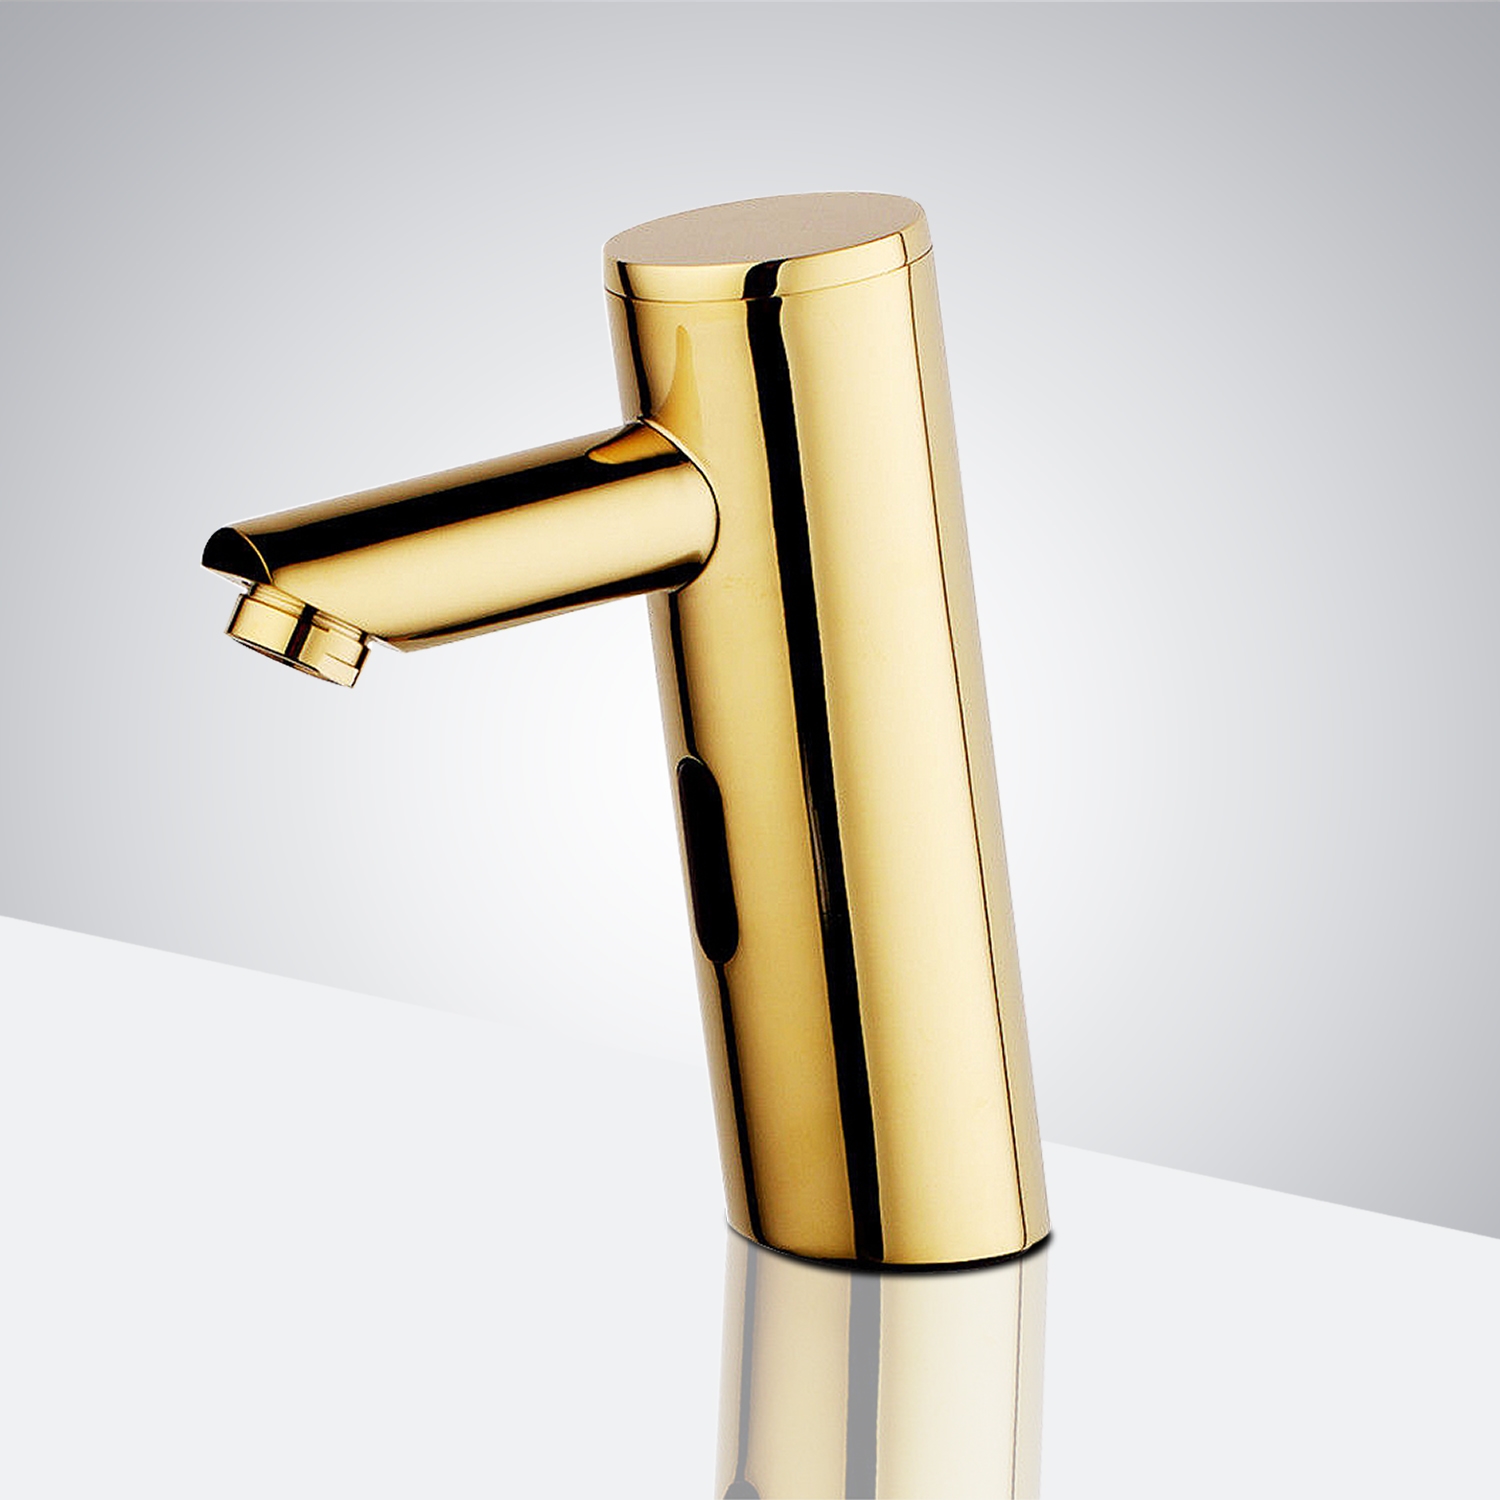 BathSelect<sup>®</sup>Gold Tone Platinum Automatic Thermostatic Commercial Sensor Tap Solid Brass Construction